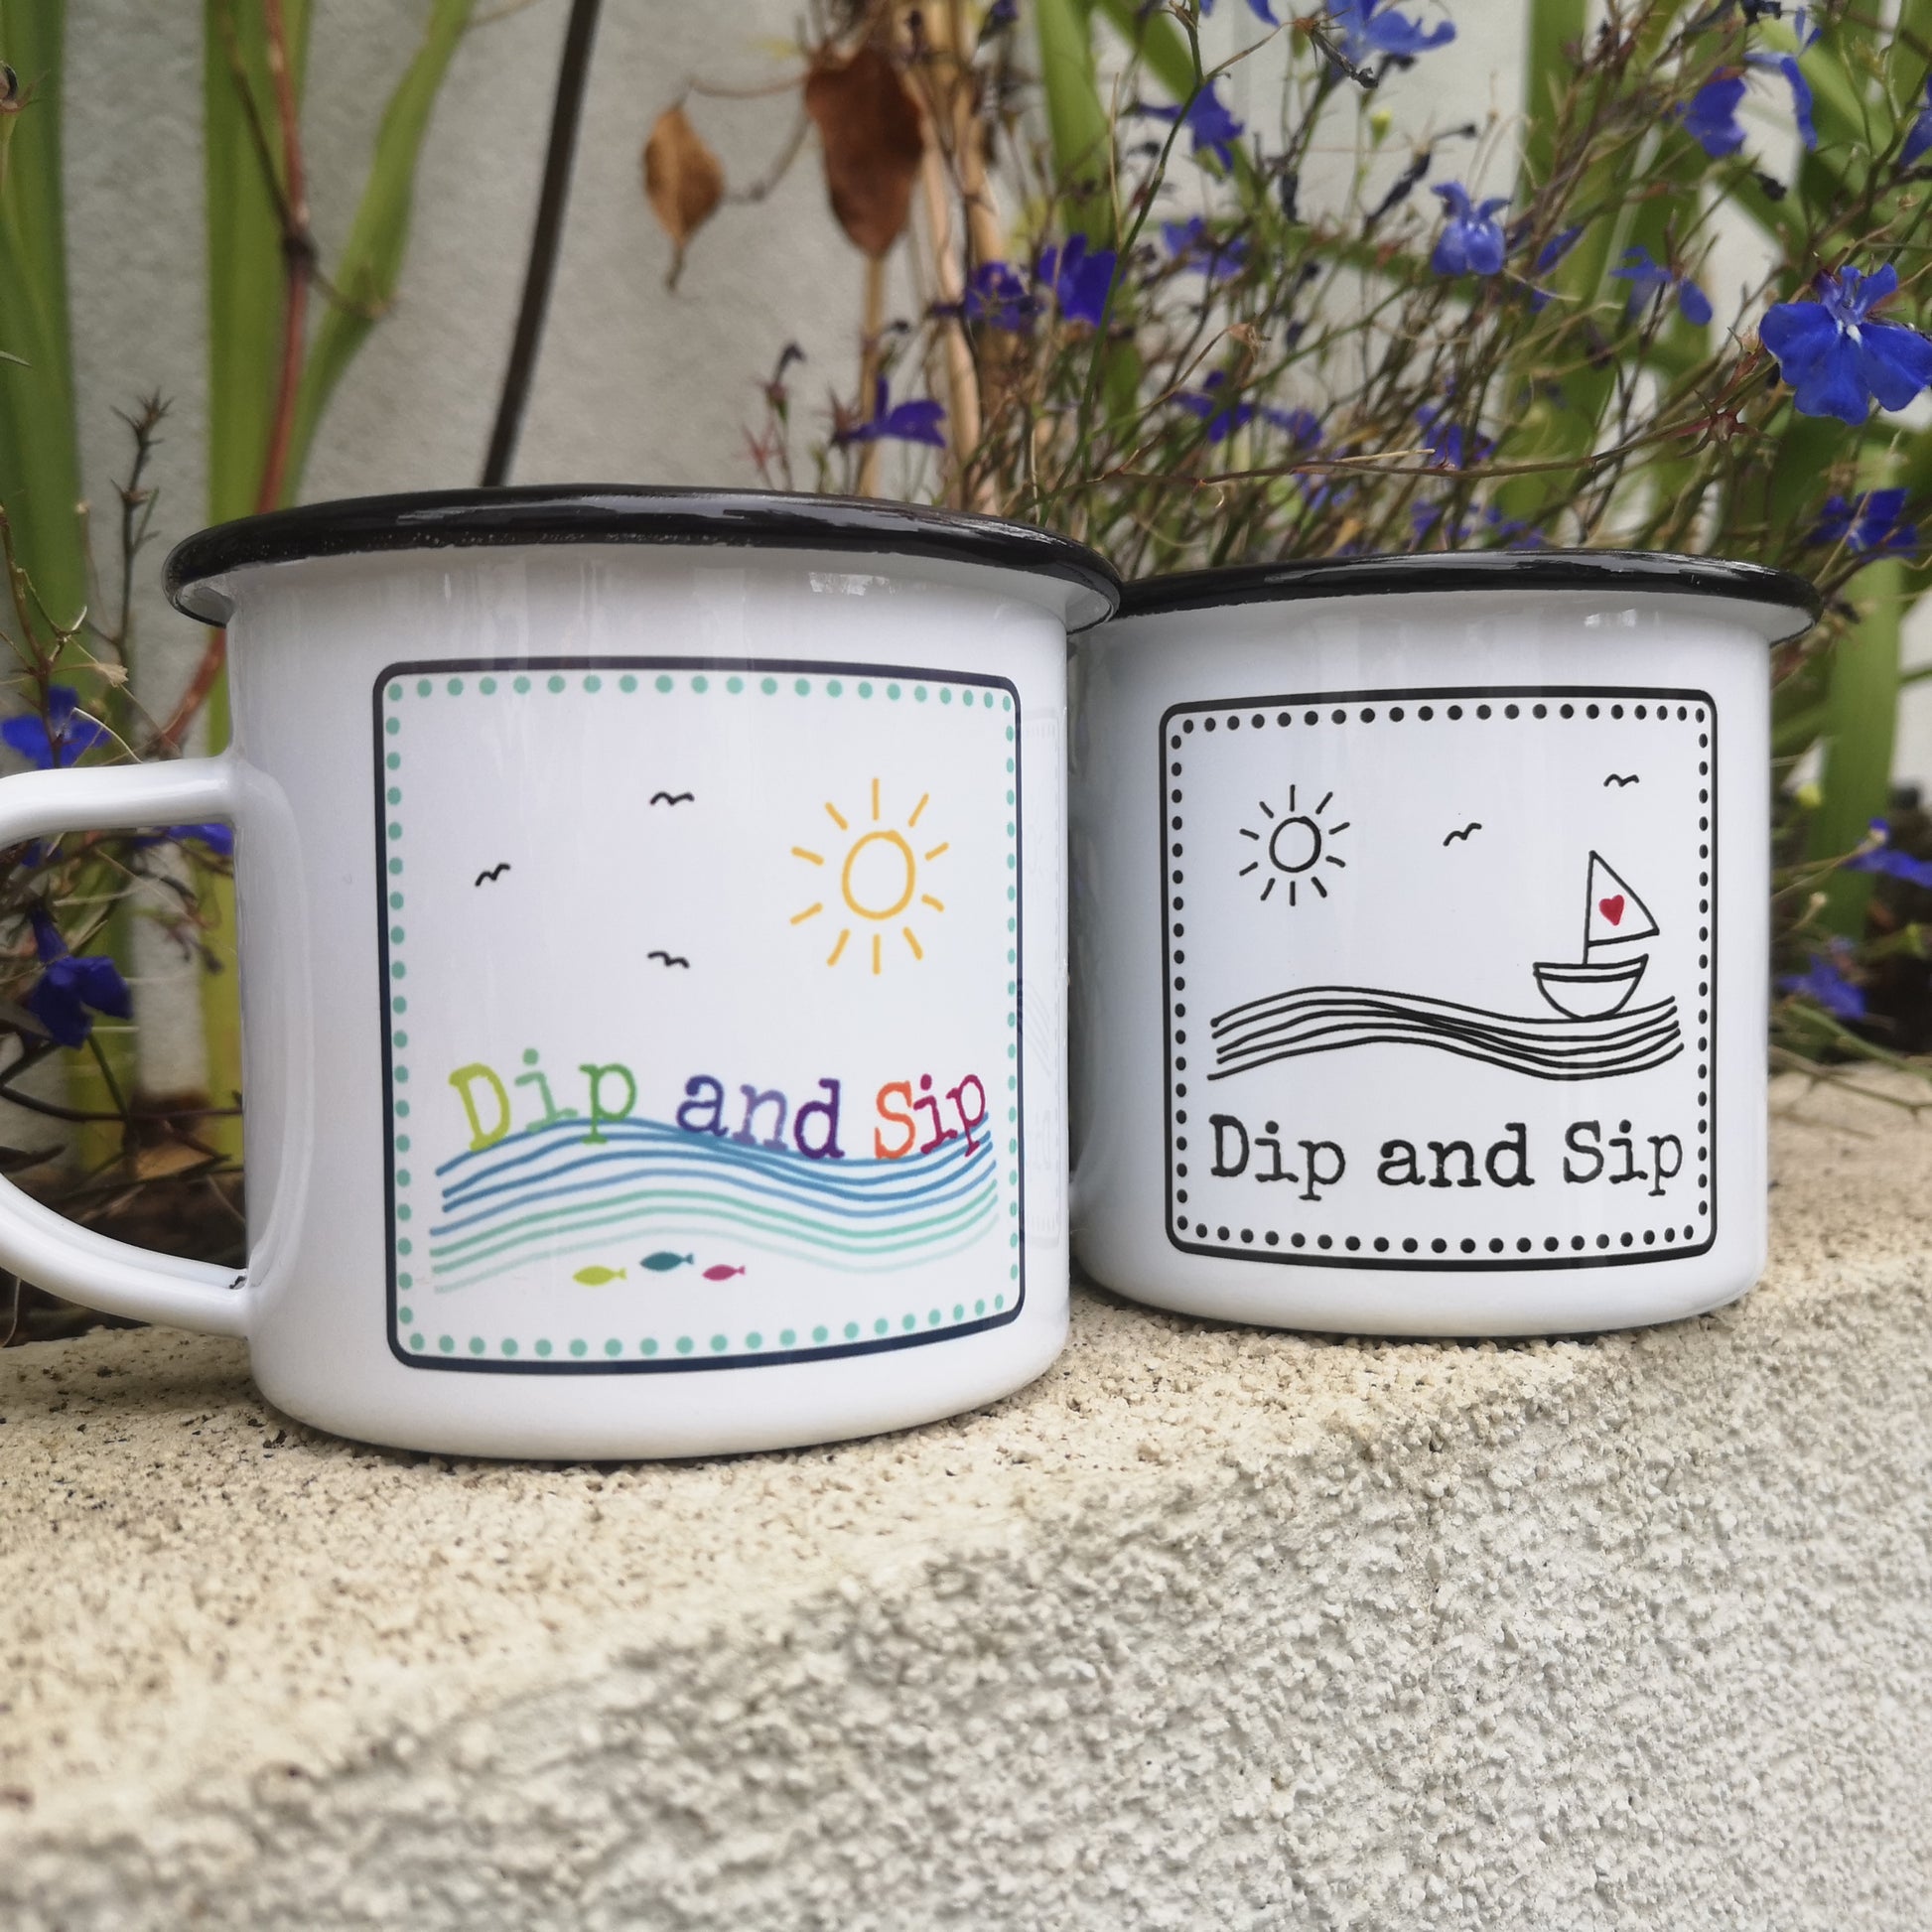 A white steel enamel mug with a year round swimmer's mantra on it - dip and sip.  Photo shows both designs available - 1 in black and white with a sailboat, the other with coloured fish under the waves